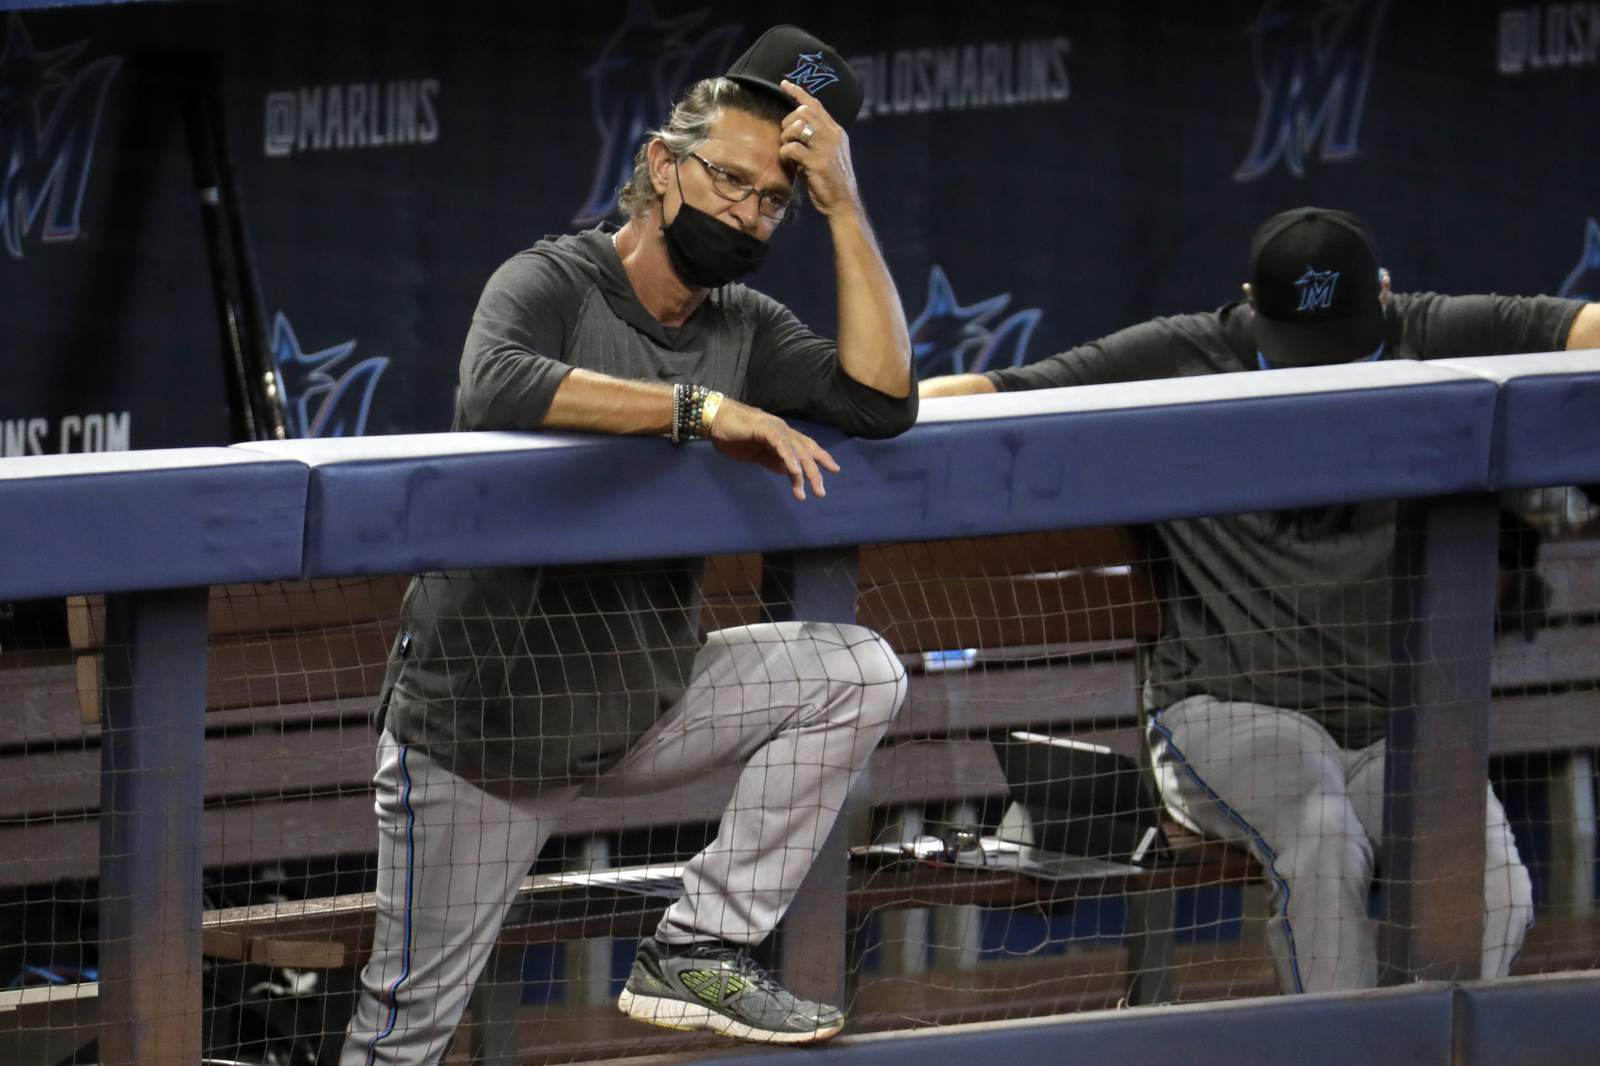 Will Manso: 2020 Marlins season preview and prediction